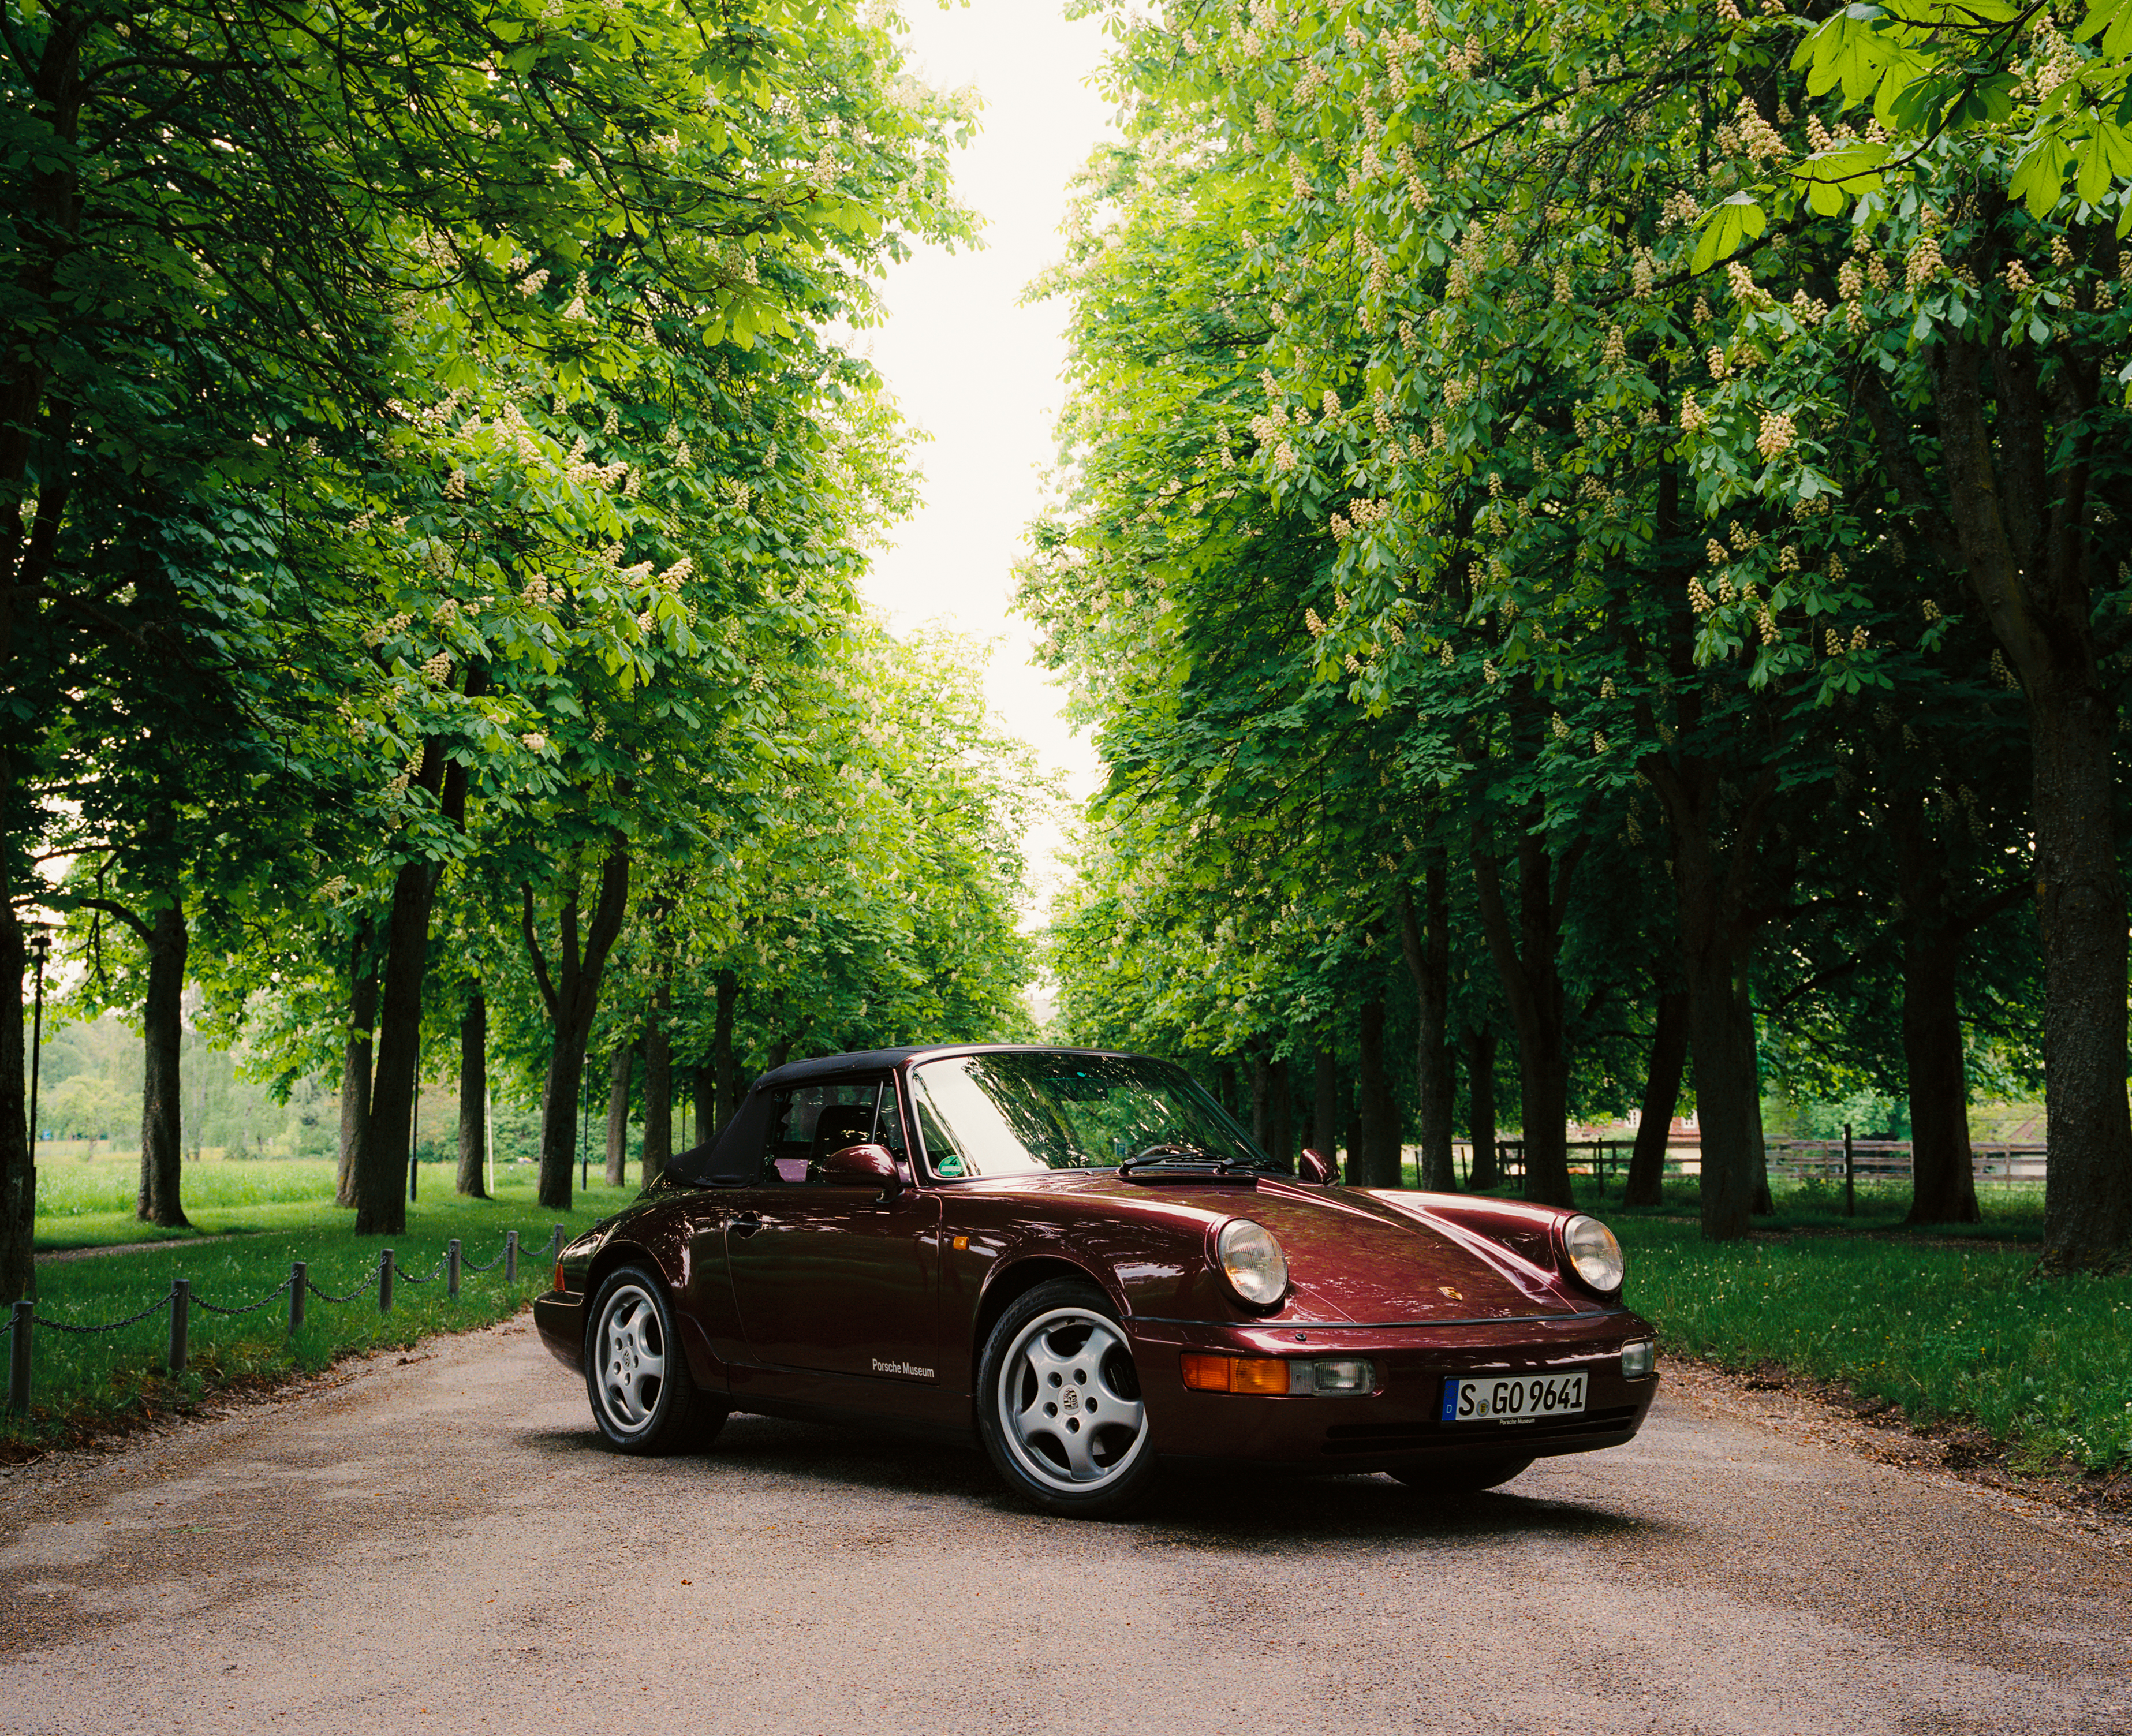 Porsche 911 Carrera 2 Cabriolet (type 964) on tree-lined road